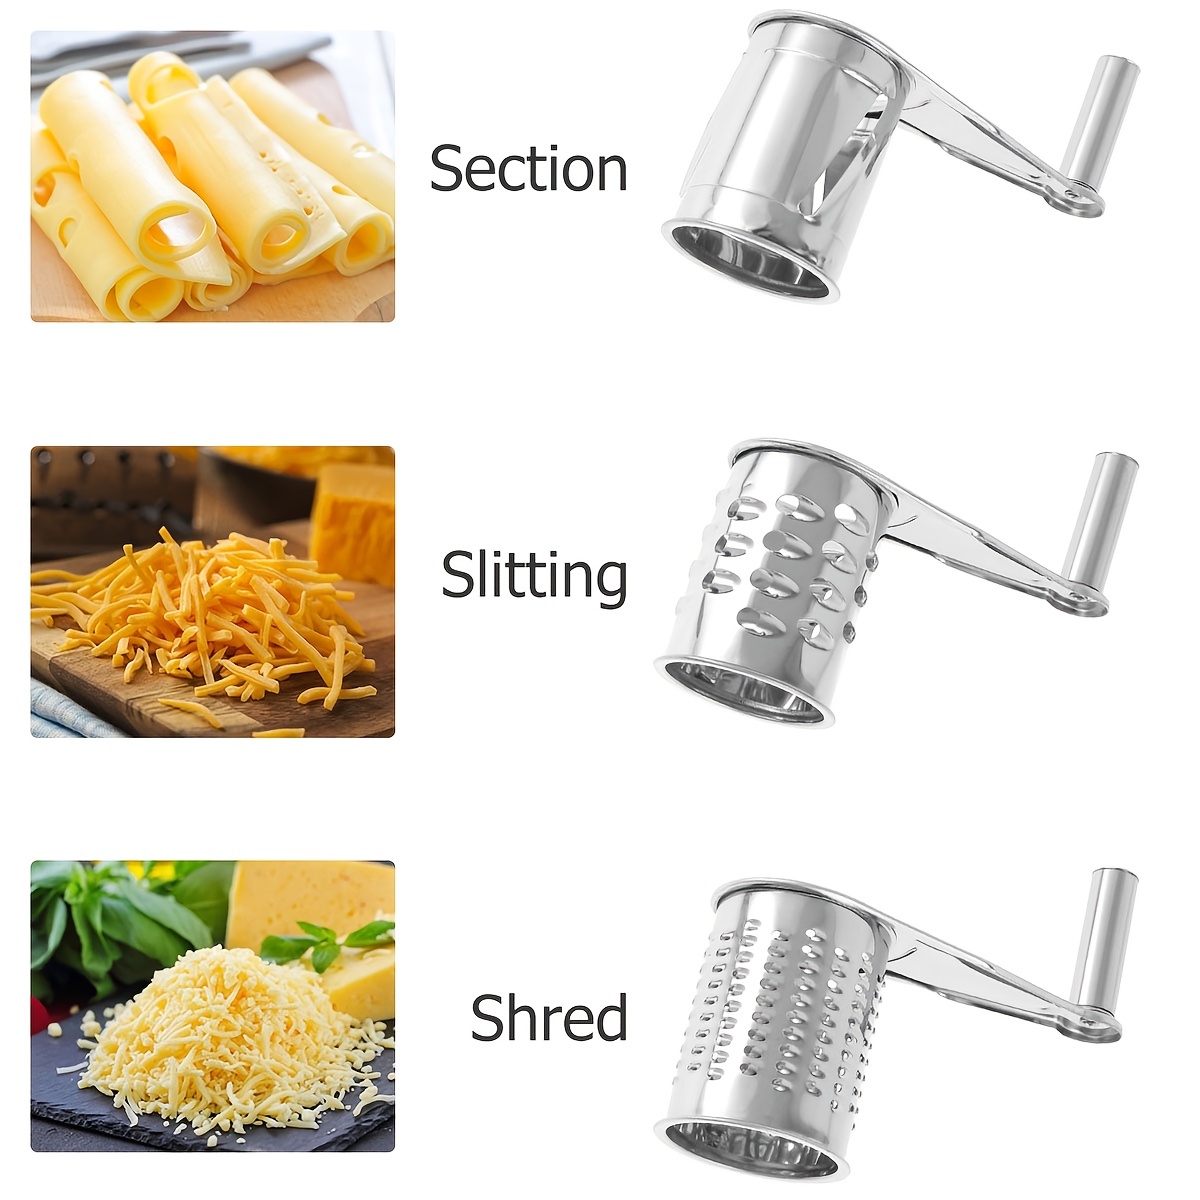 Rotary Cheese Grater With Interchangeable Grinding Blade, Parmesan Cheese  Grater, Rotary Handheld Grater For Hard Cheese Chocolate Nuts, Kitchen  Stuff, Kitchen Gadgets - Temu